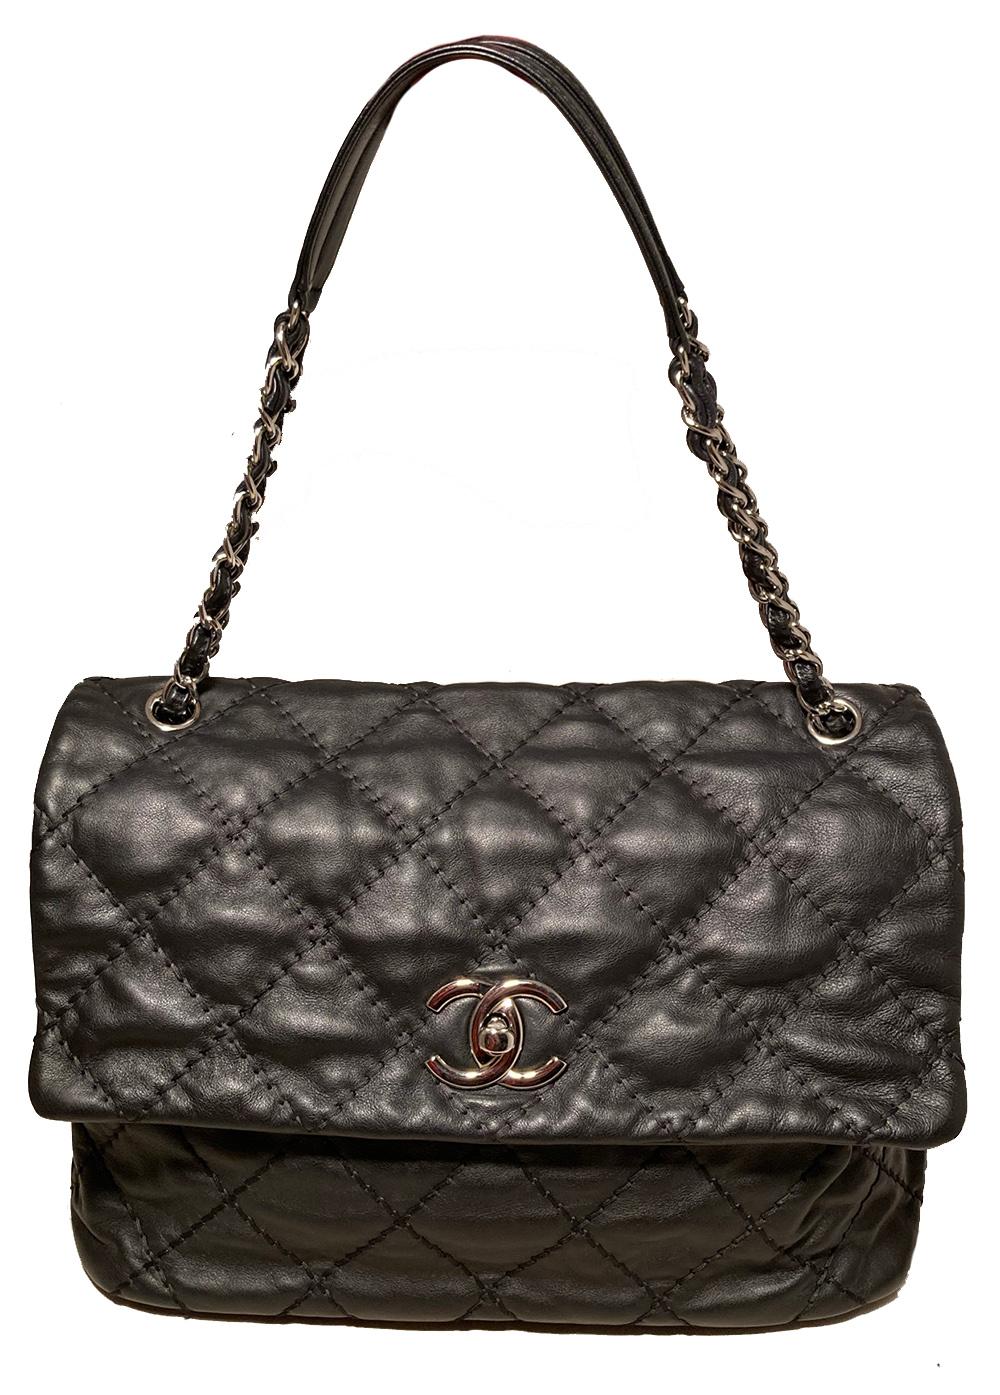 Chanel Black Leather Ultimate Stitch Classic Flap Shoulder Bag in excellent condition. Black calfskin leather exterior trimmed with thick black top stitching and silver hardware. Double woven chain and leather shoulder straps with centered leather